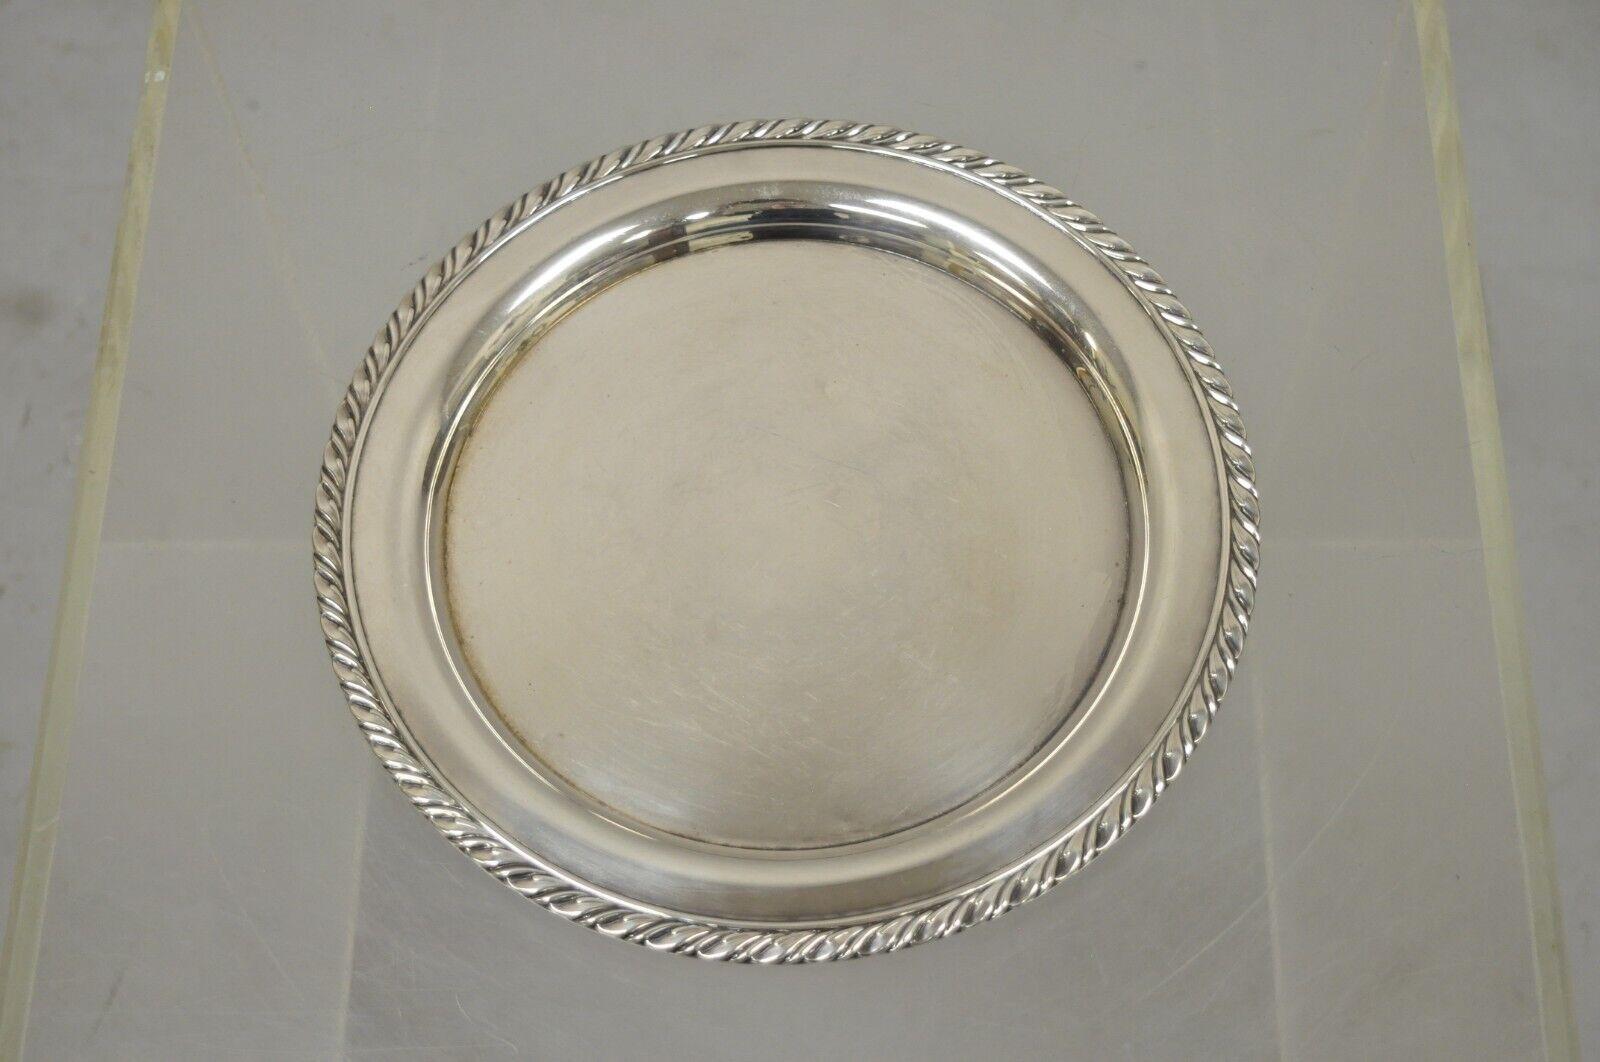 Vintage Oneida Round Silver Plate Serving Tray Platter Dish 1